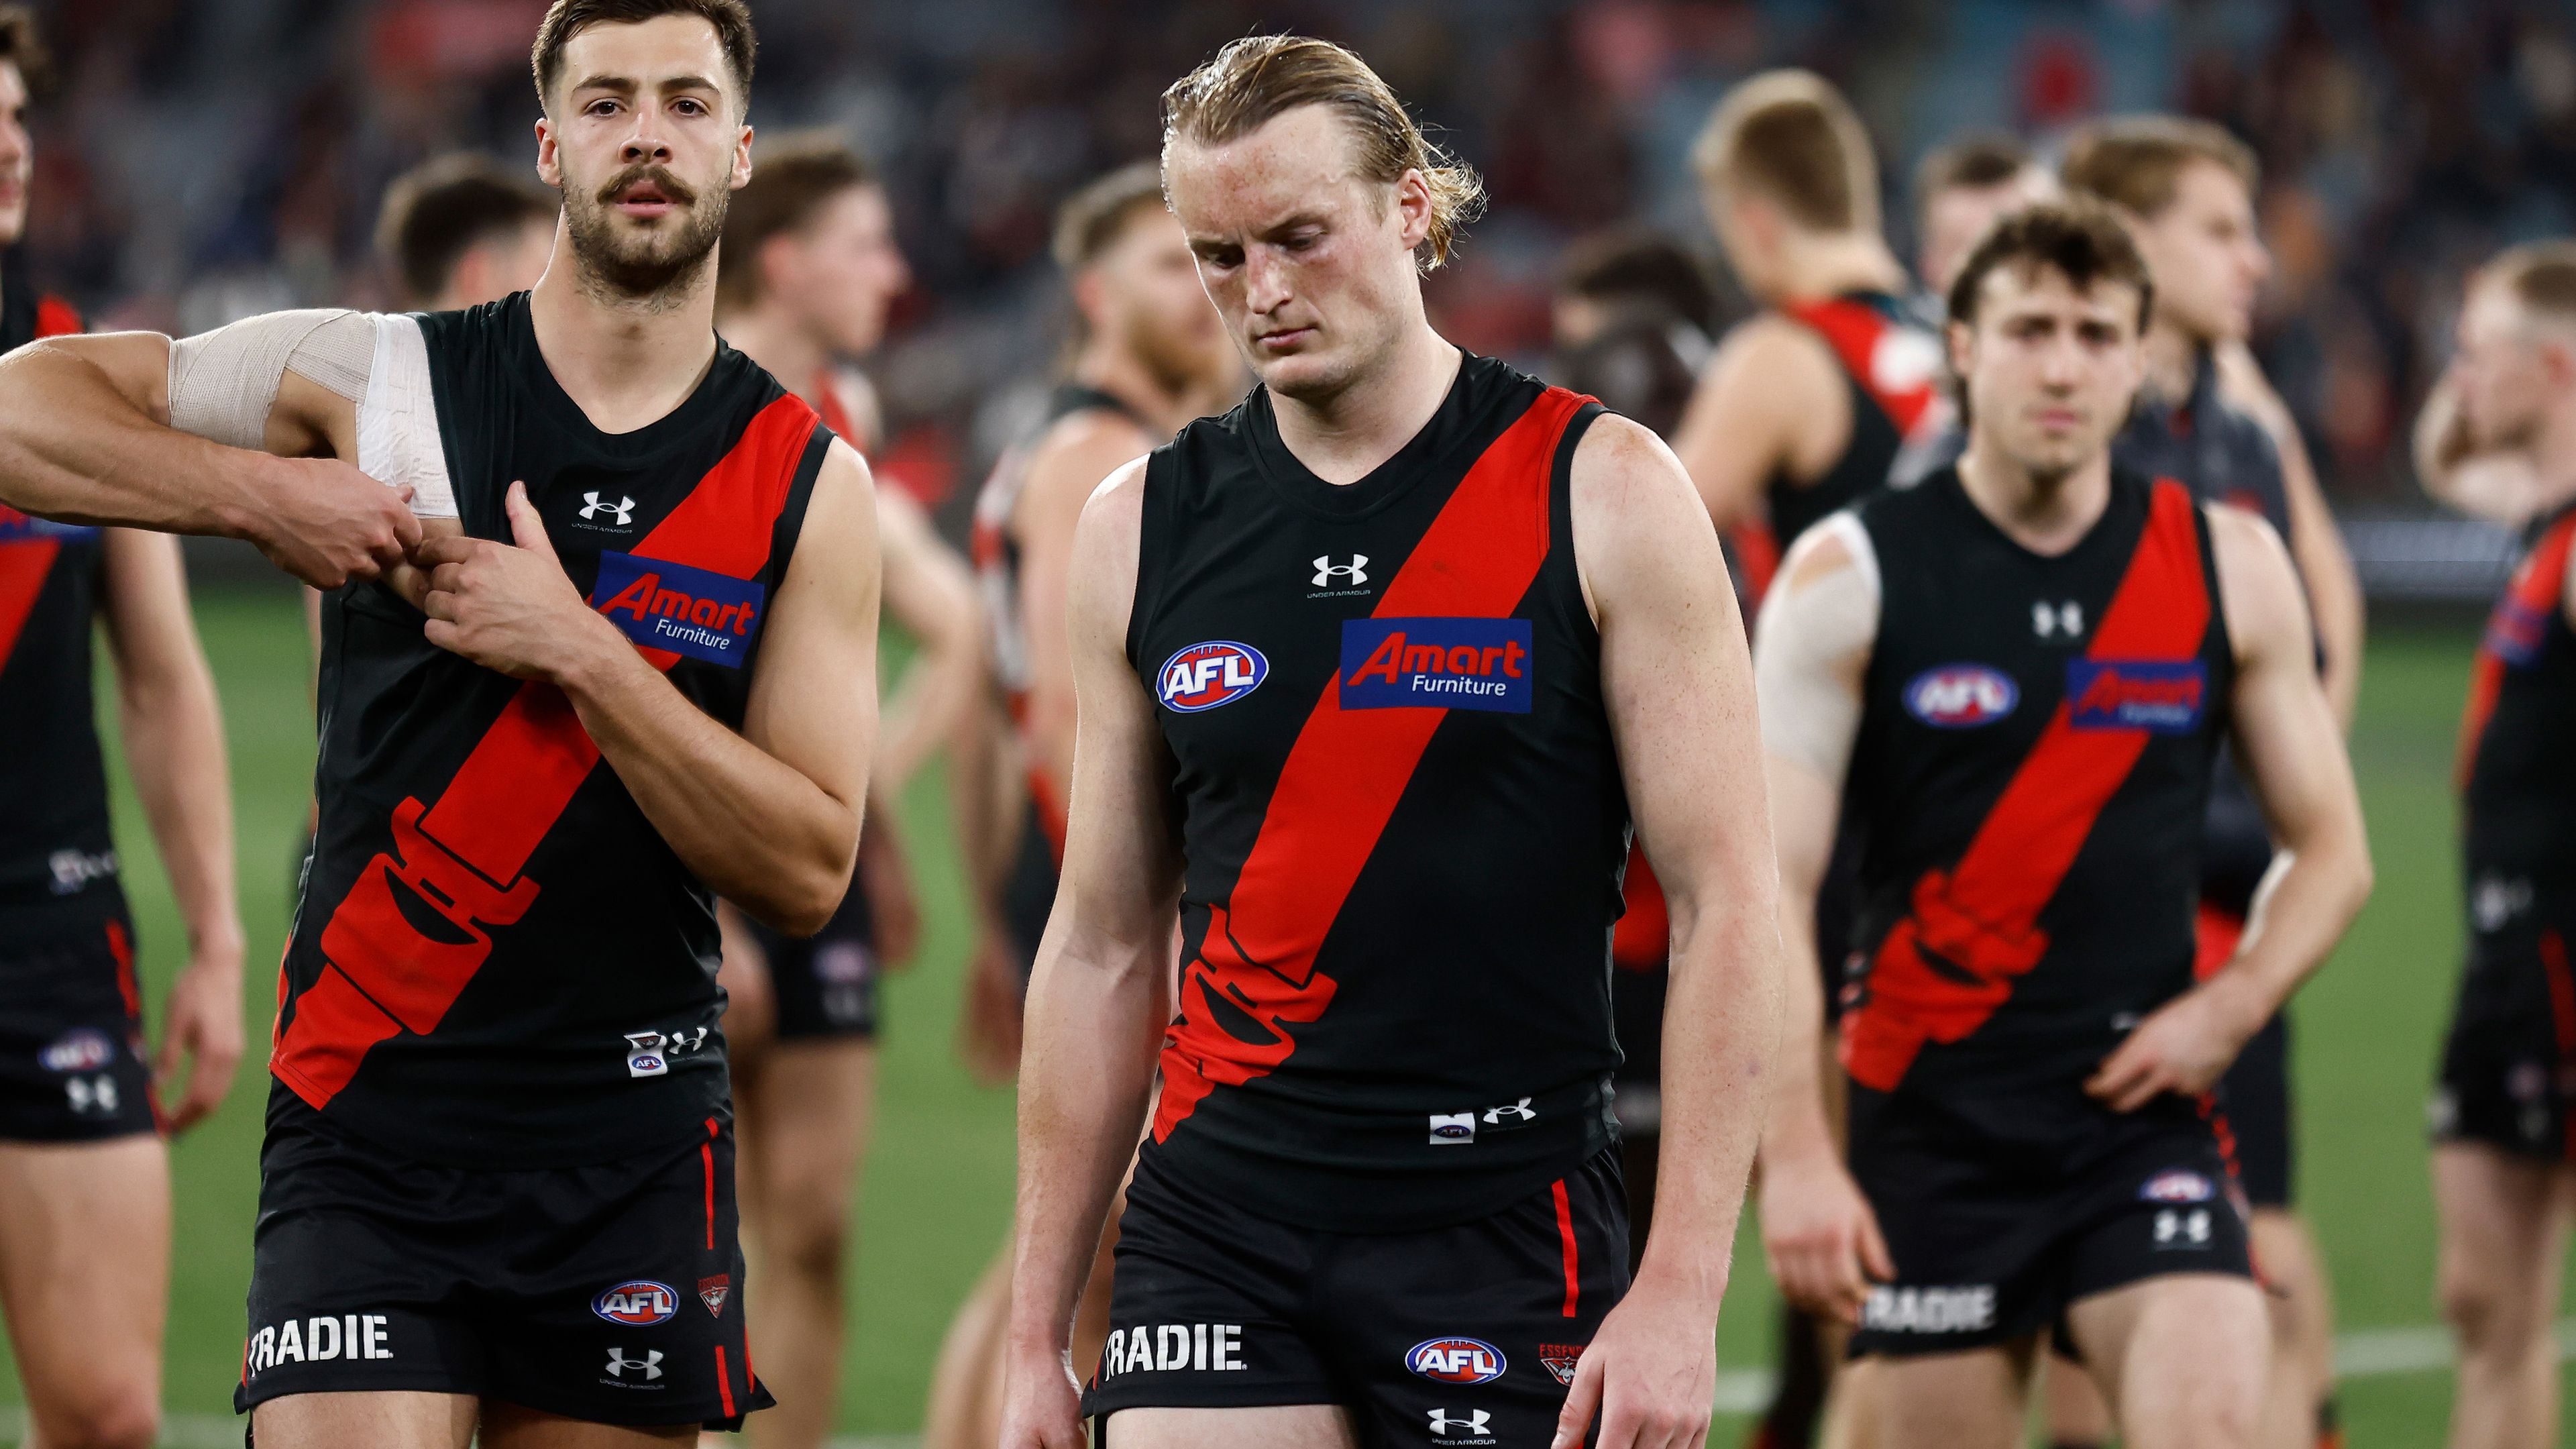 MELBOURNE, AUSTRALIA - AUGUST 25: Mason Redman of the Bombers looks dejected after a loss during the 2023 AFL Round 24 match between the Essendon Bombers and the Collingwood Magpies at Melbourne Cricket Ground on August 25, 2023 in Melbourne, Australia. (Photo by Michael Willson/AFL Photos via Getty Images)